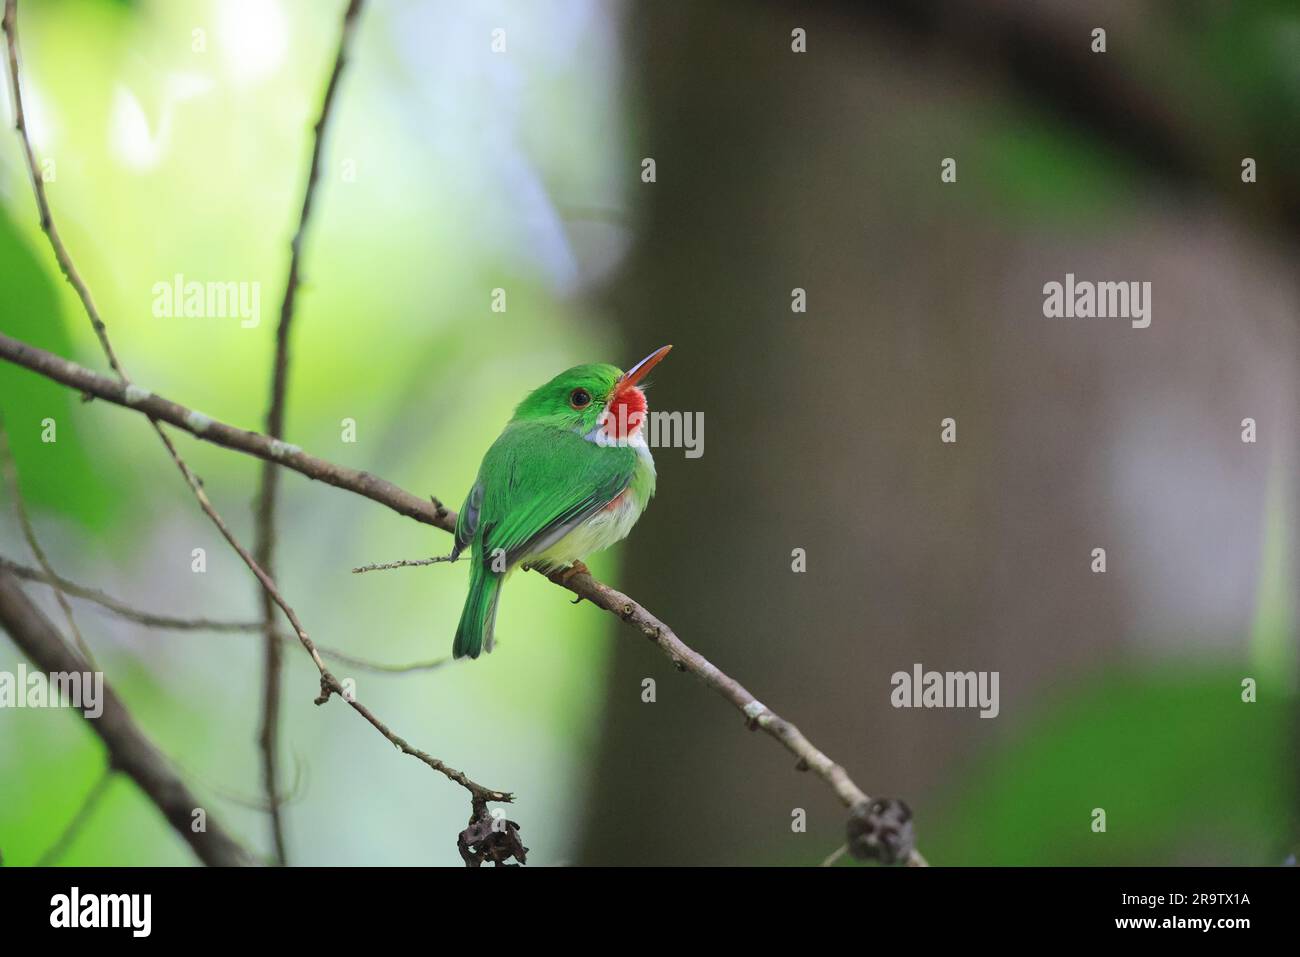 Jamaican tody (Todus todus), one of the smallest birds in the world Stock Photo